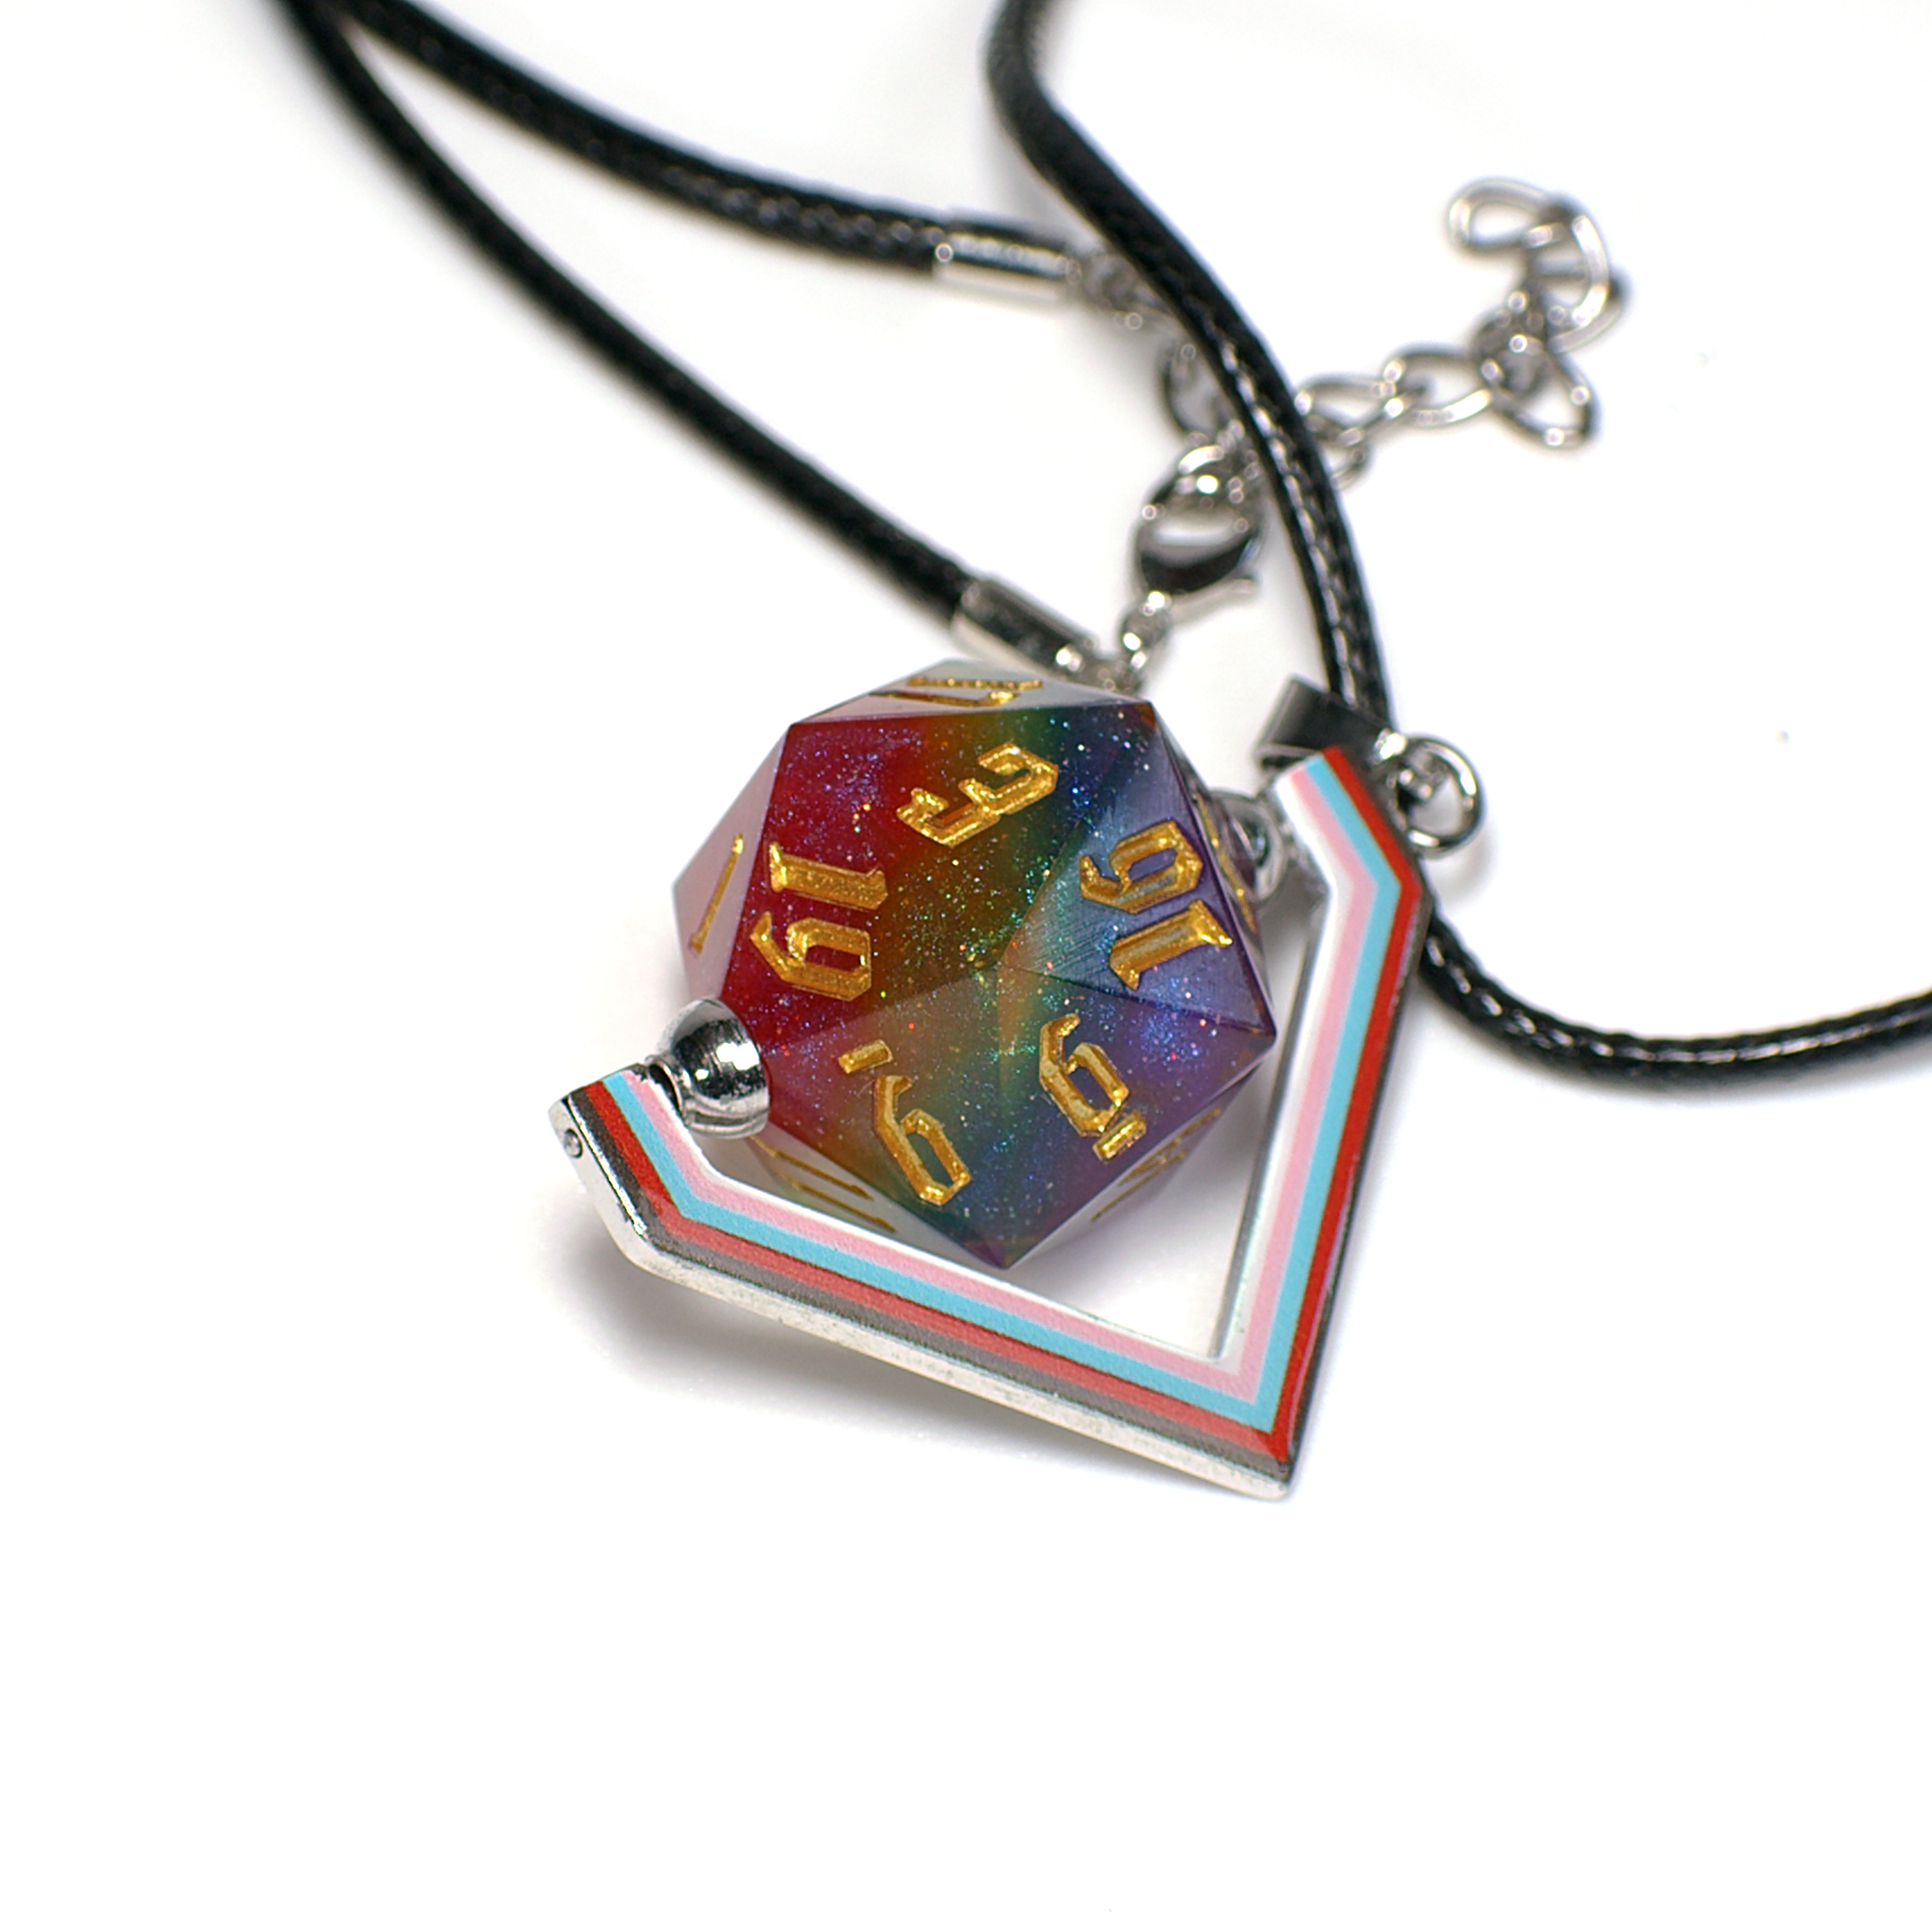 Art] Designed a necklace for carrying my lucky d20 to sessions : r/DnD